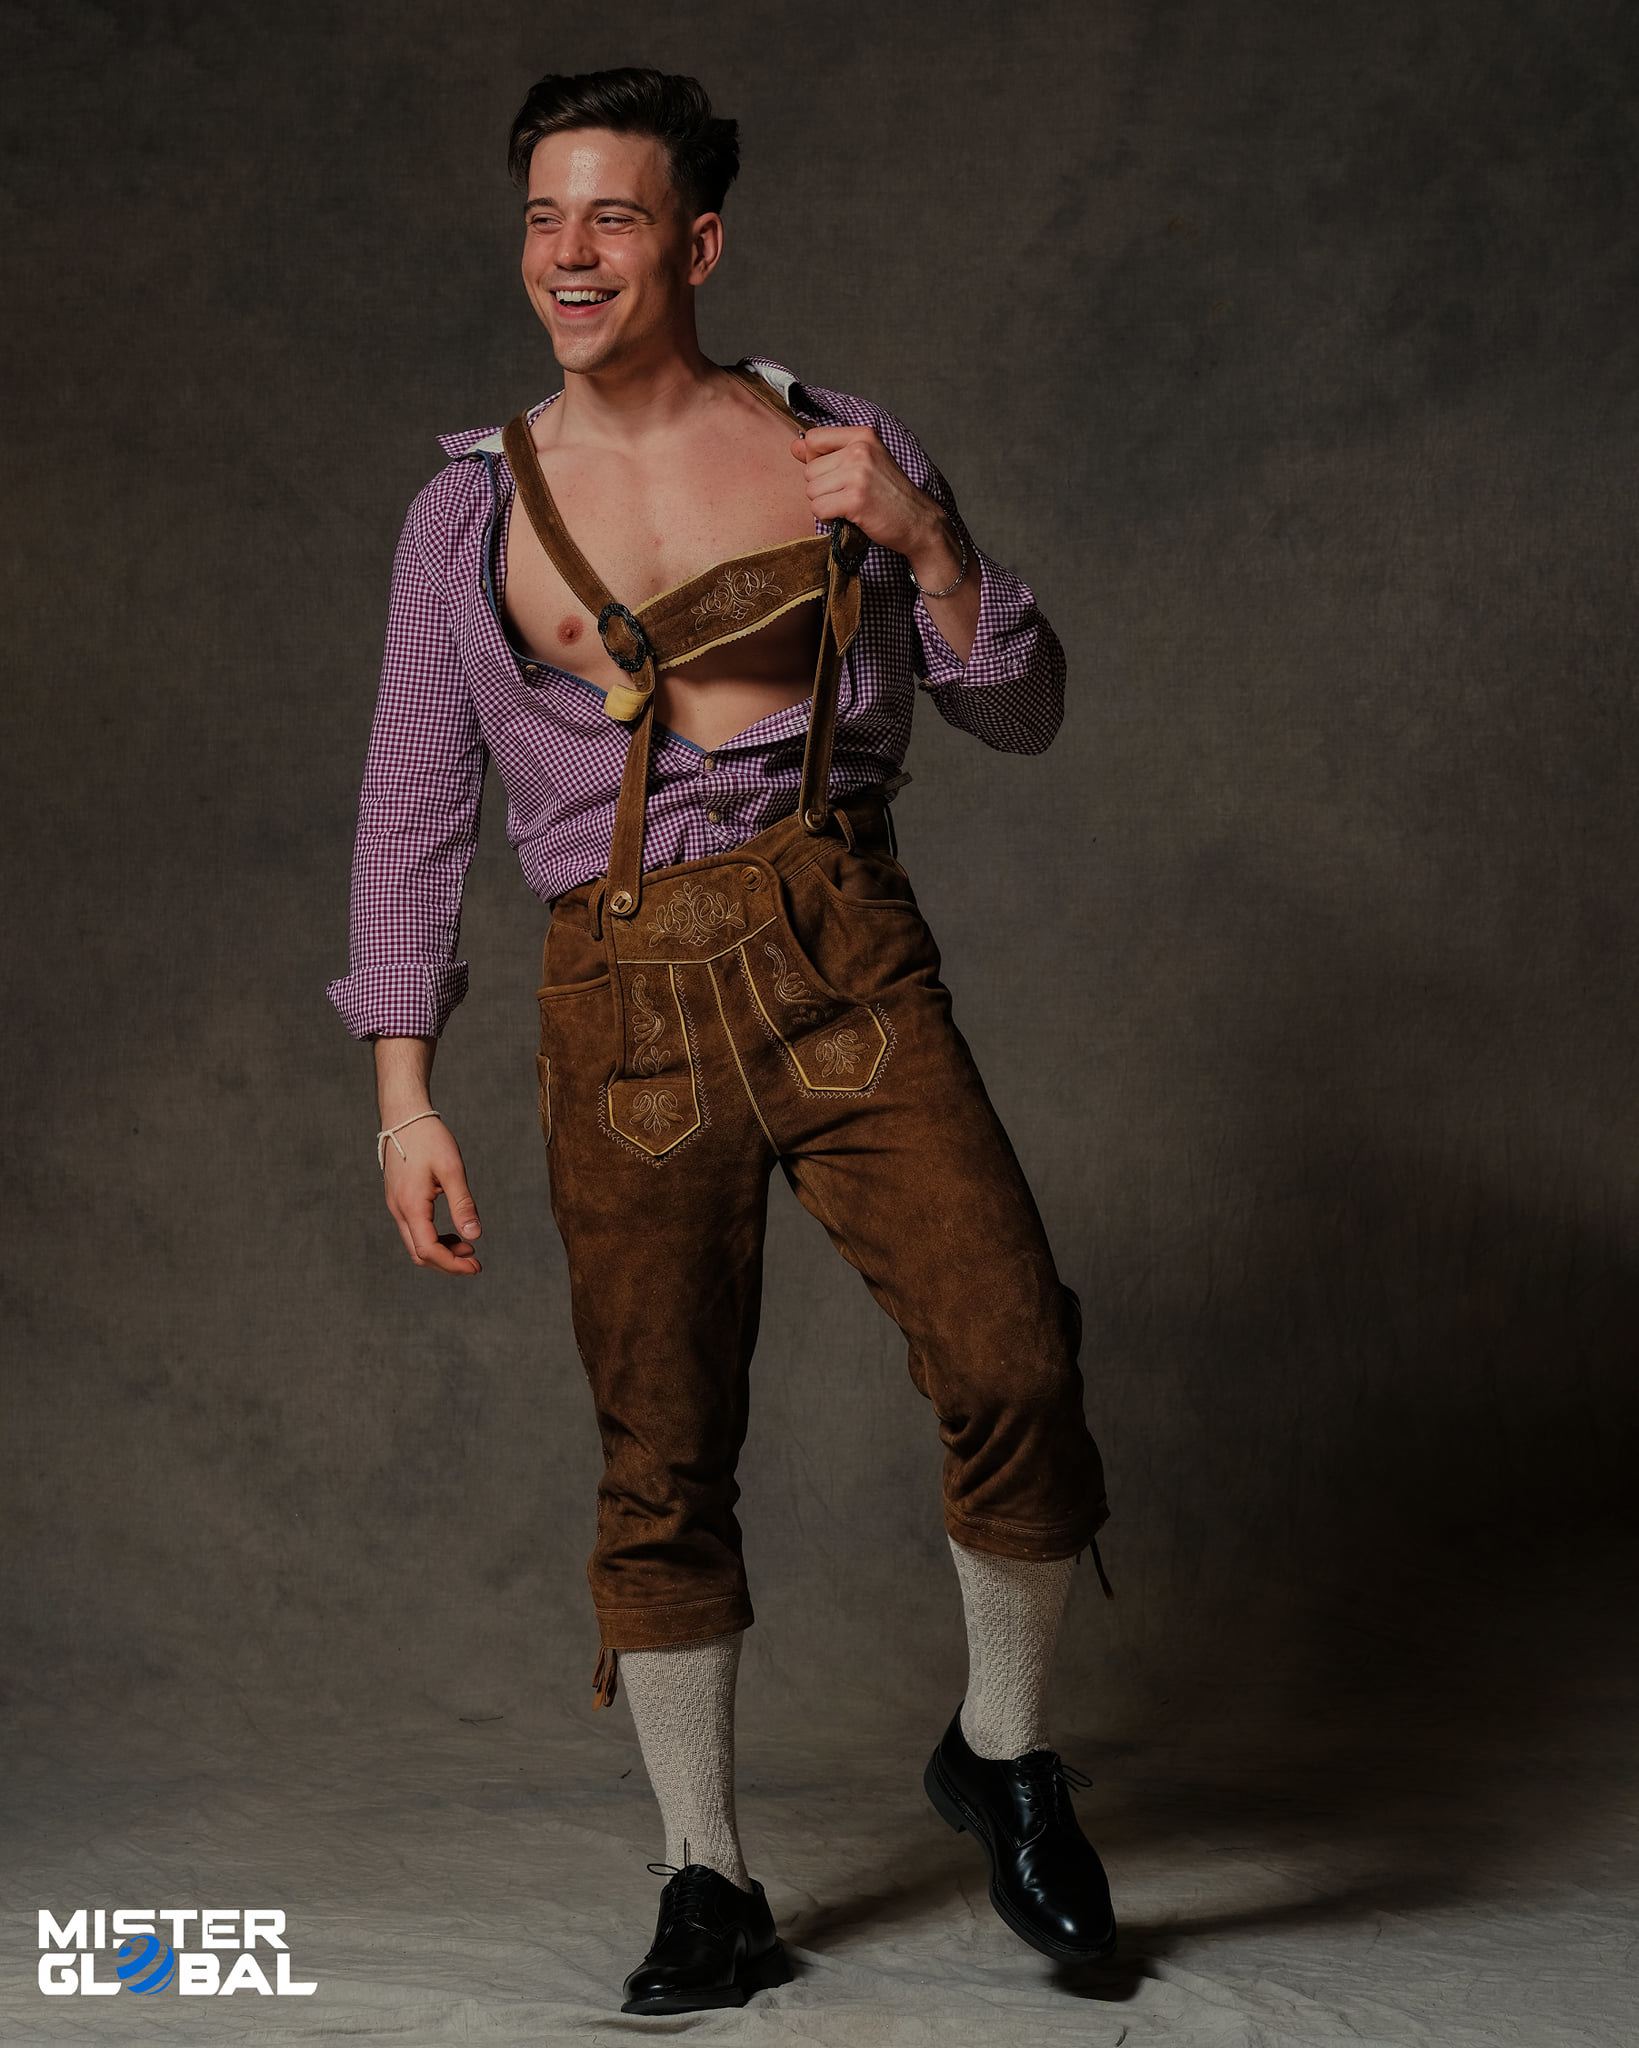 Smiling man in knee-length overalls with suspenders, open shirt, and long socks